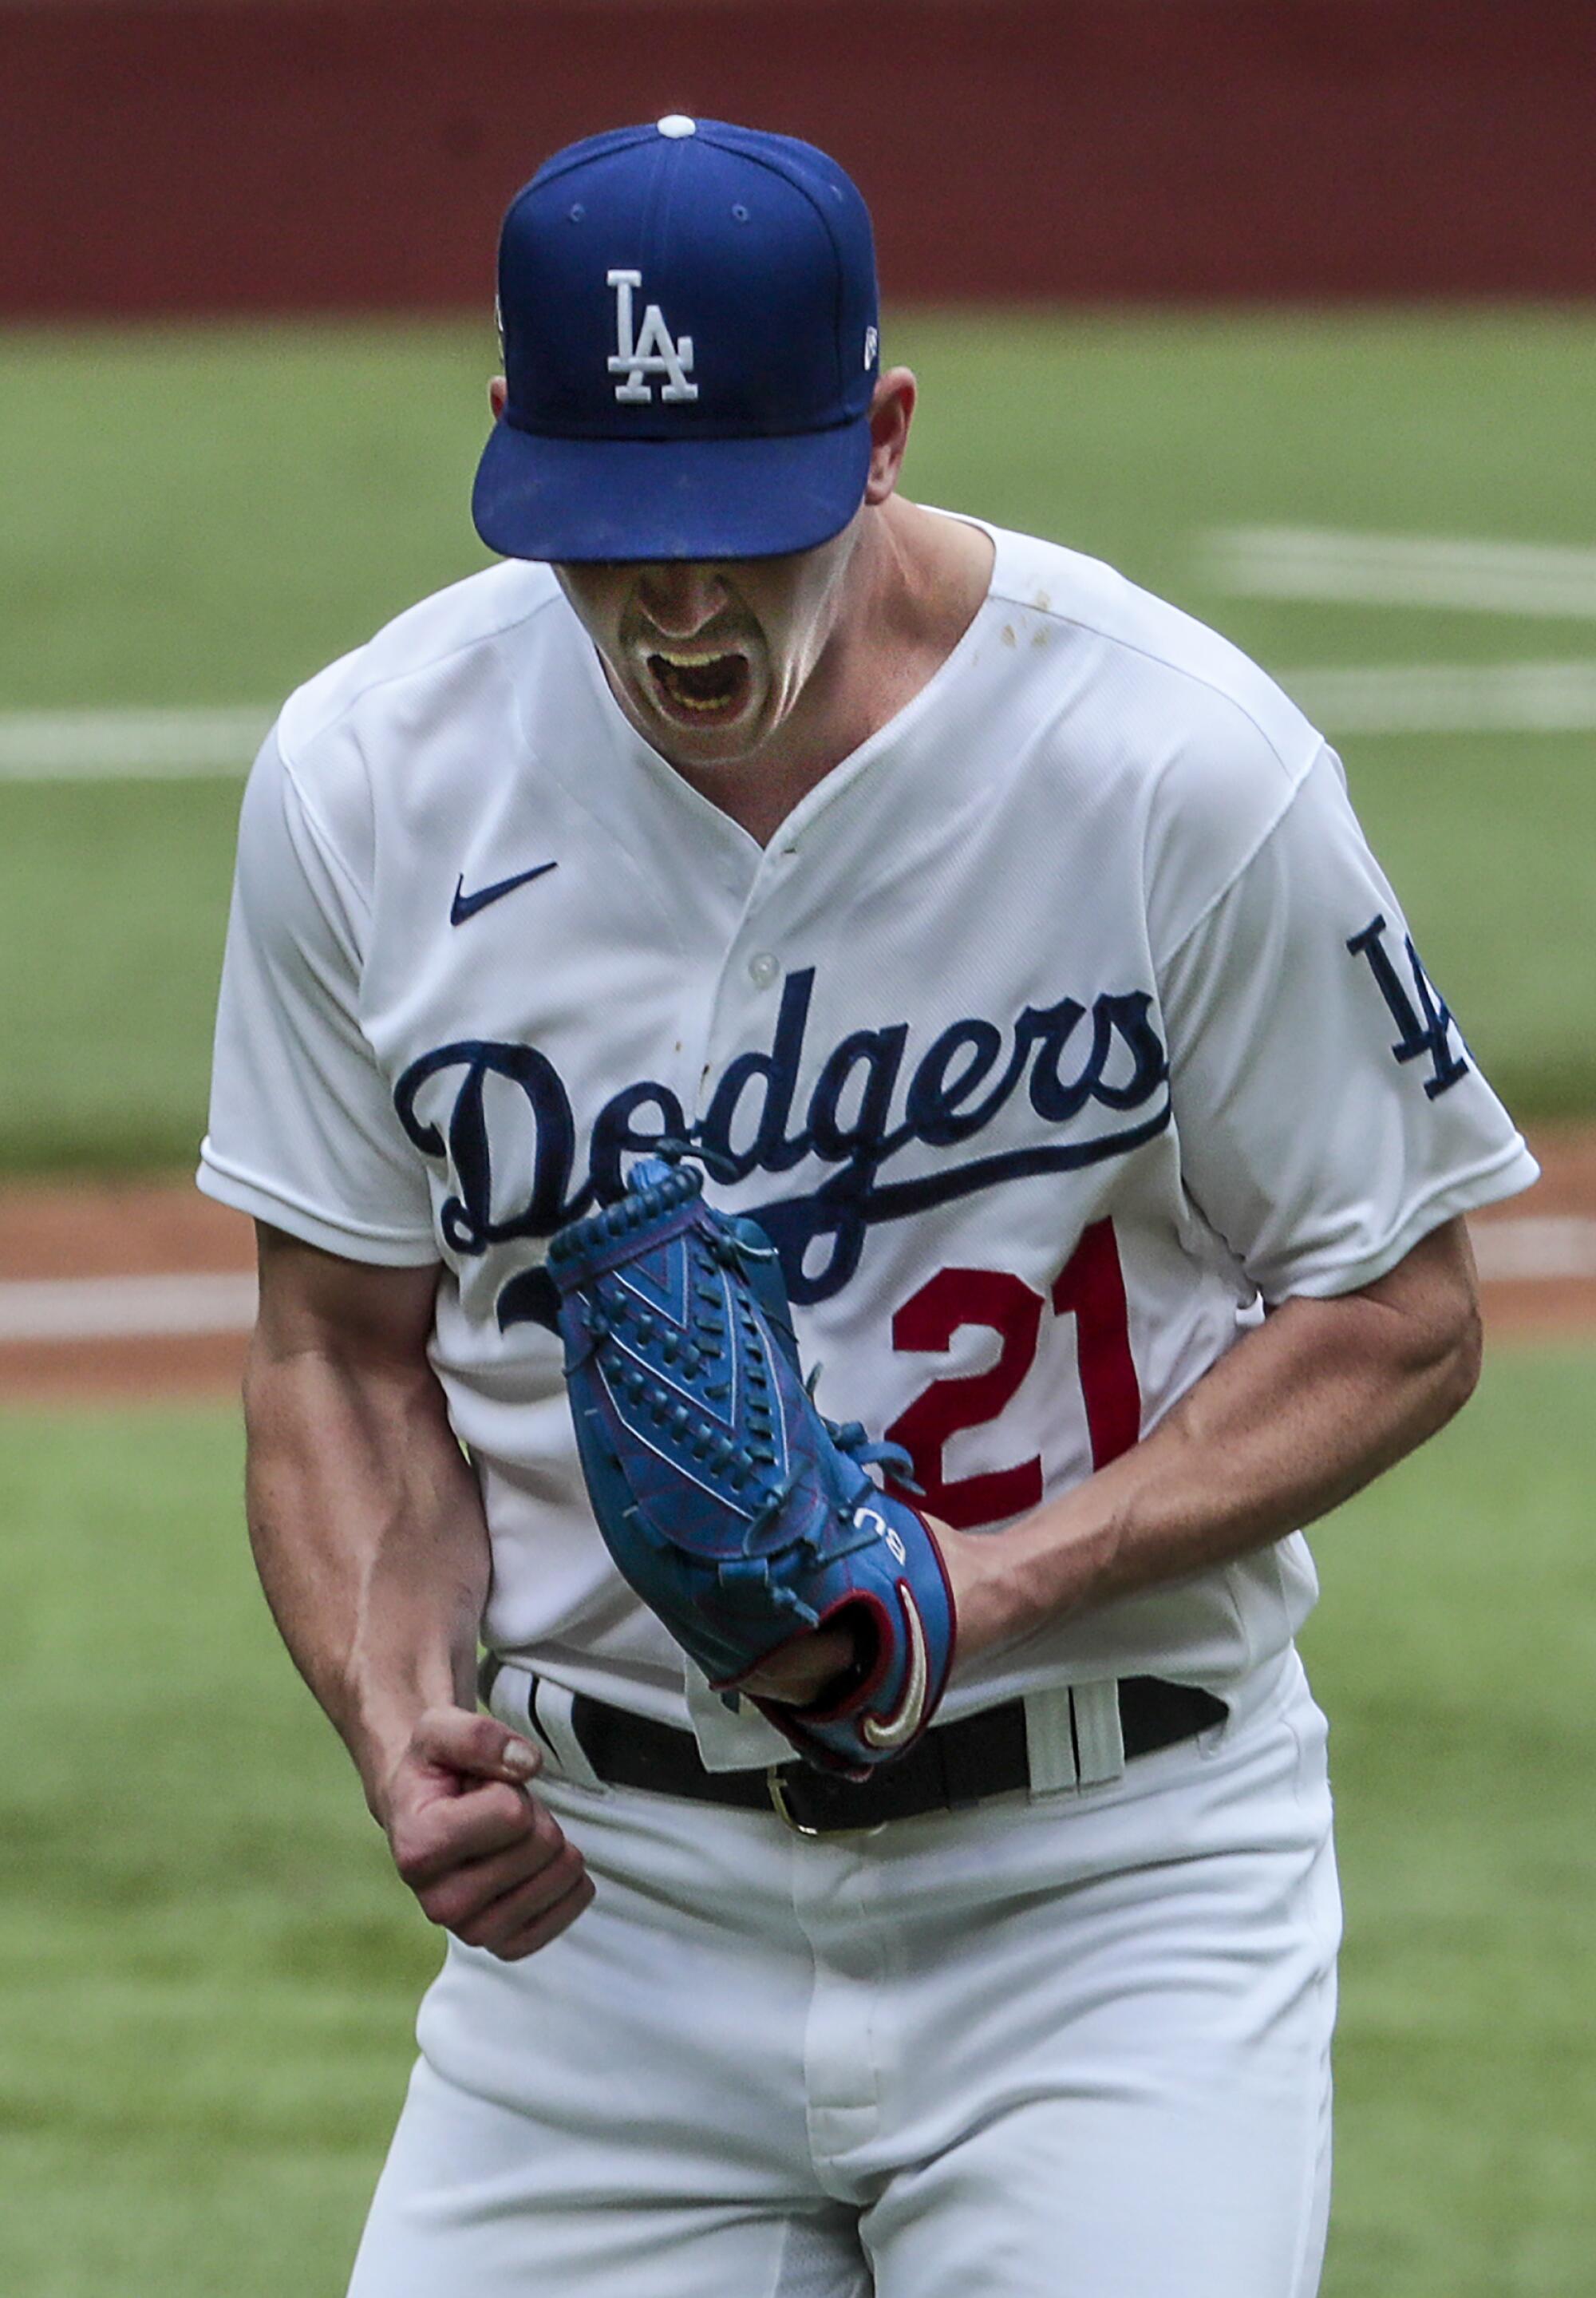 Dodgers starting pitcher Walker Buehler lets out a yell after retiring Atlanta's Cristian Pache with bases loaded in Game 6.